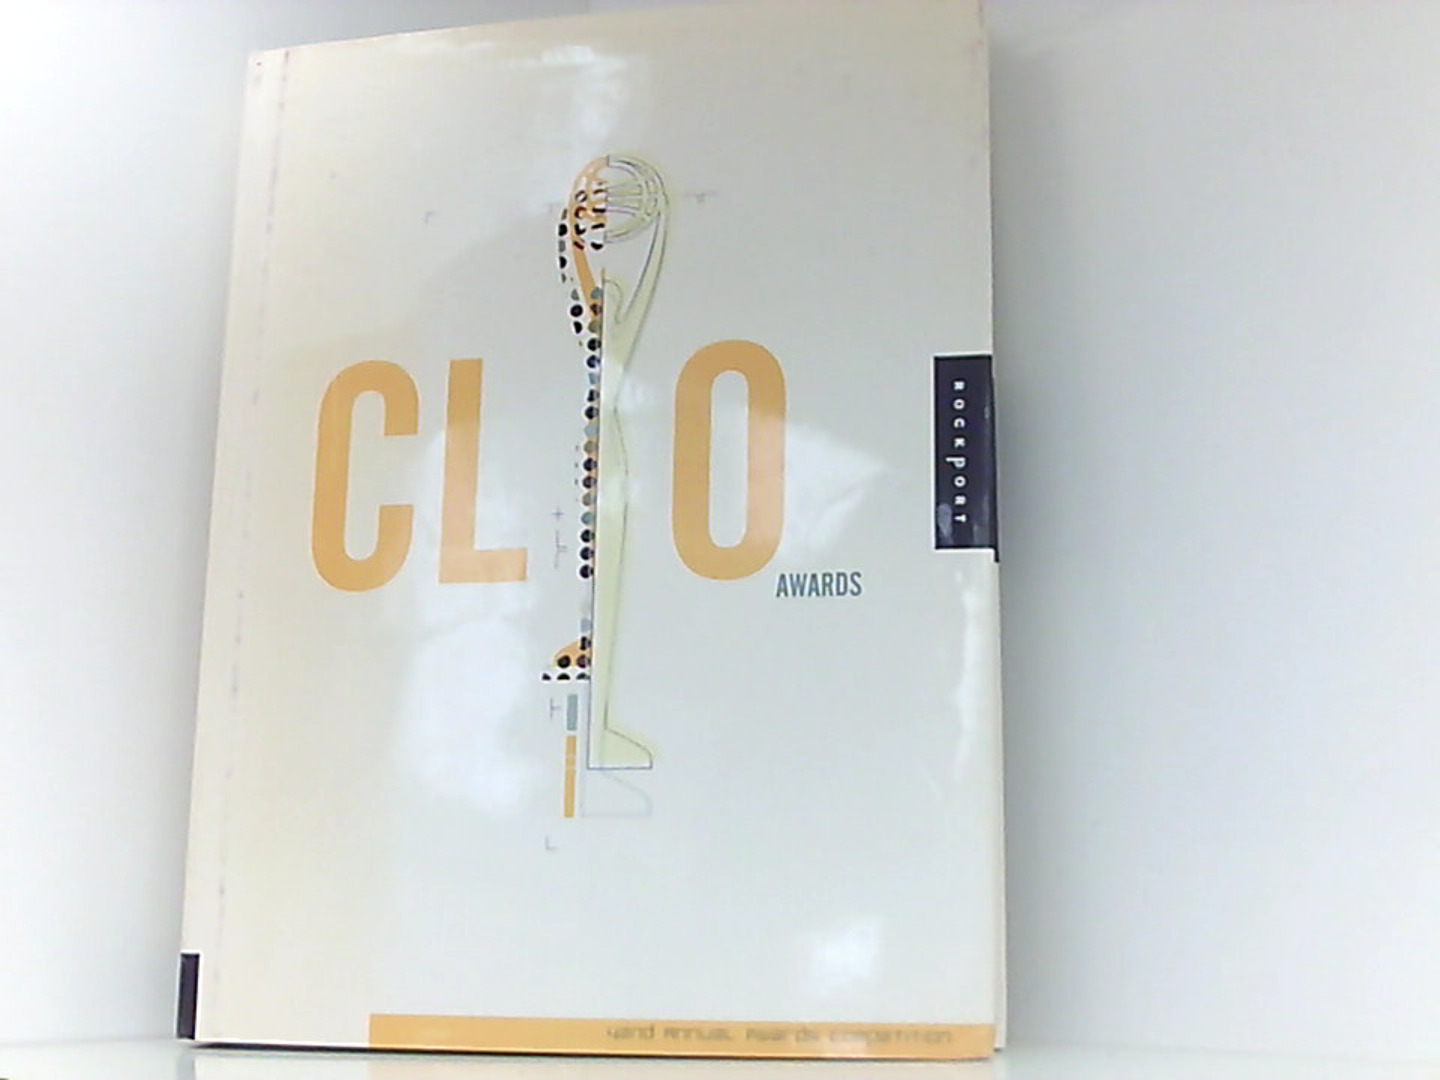 Clio Awards: The 42nd Annual Awards Competition (Clio Awards Annual, 2nd ed)  First Edition - Clio, Awards